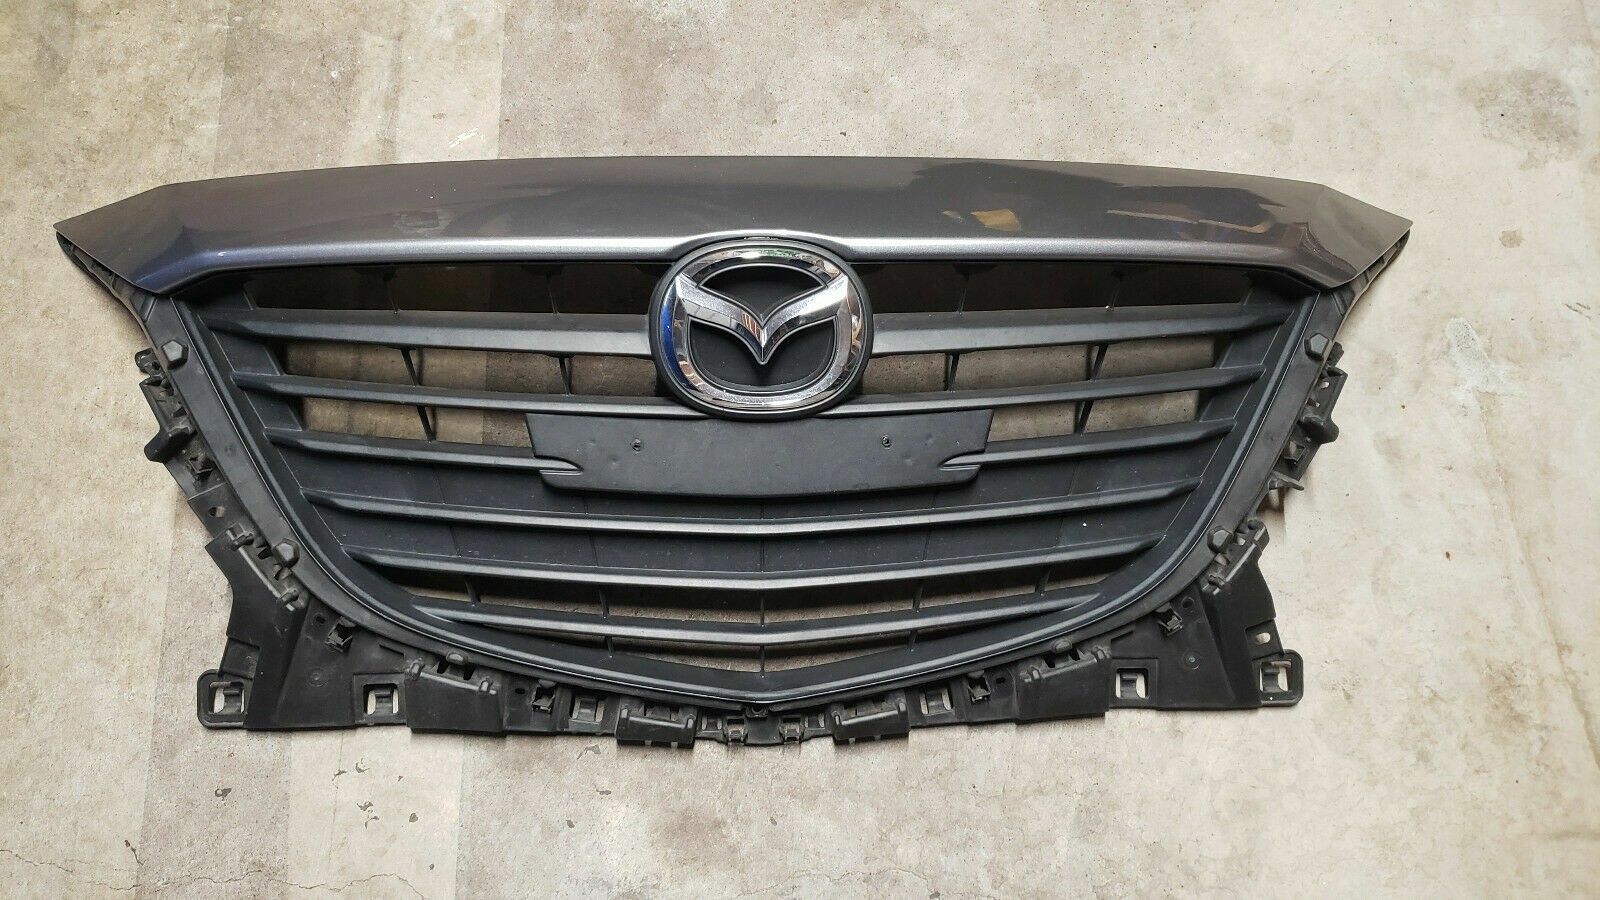 OEM Grille For Mazda 3 Silver Good Condition 2014-2016